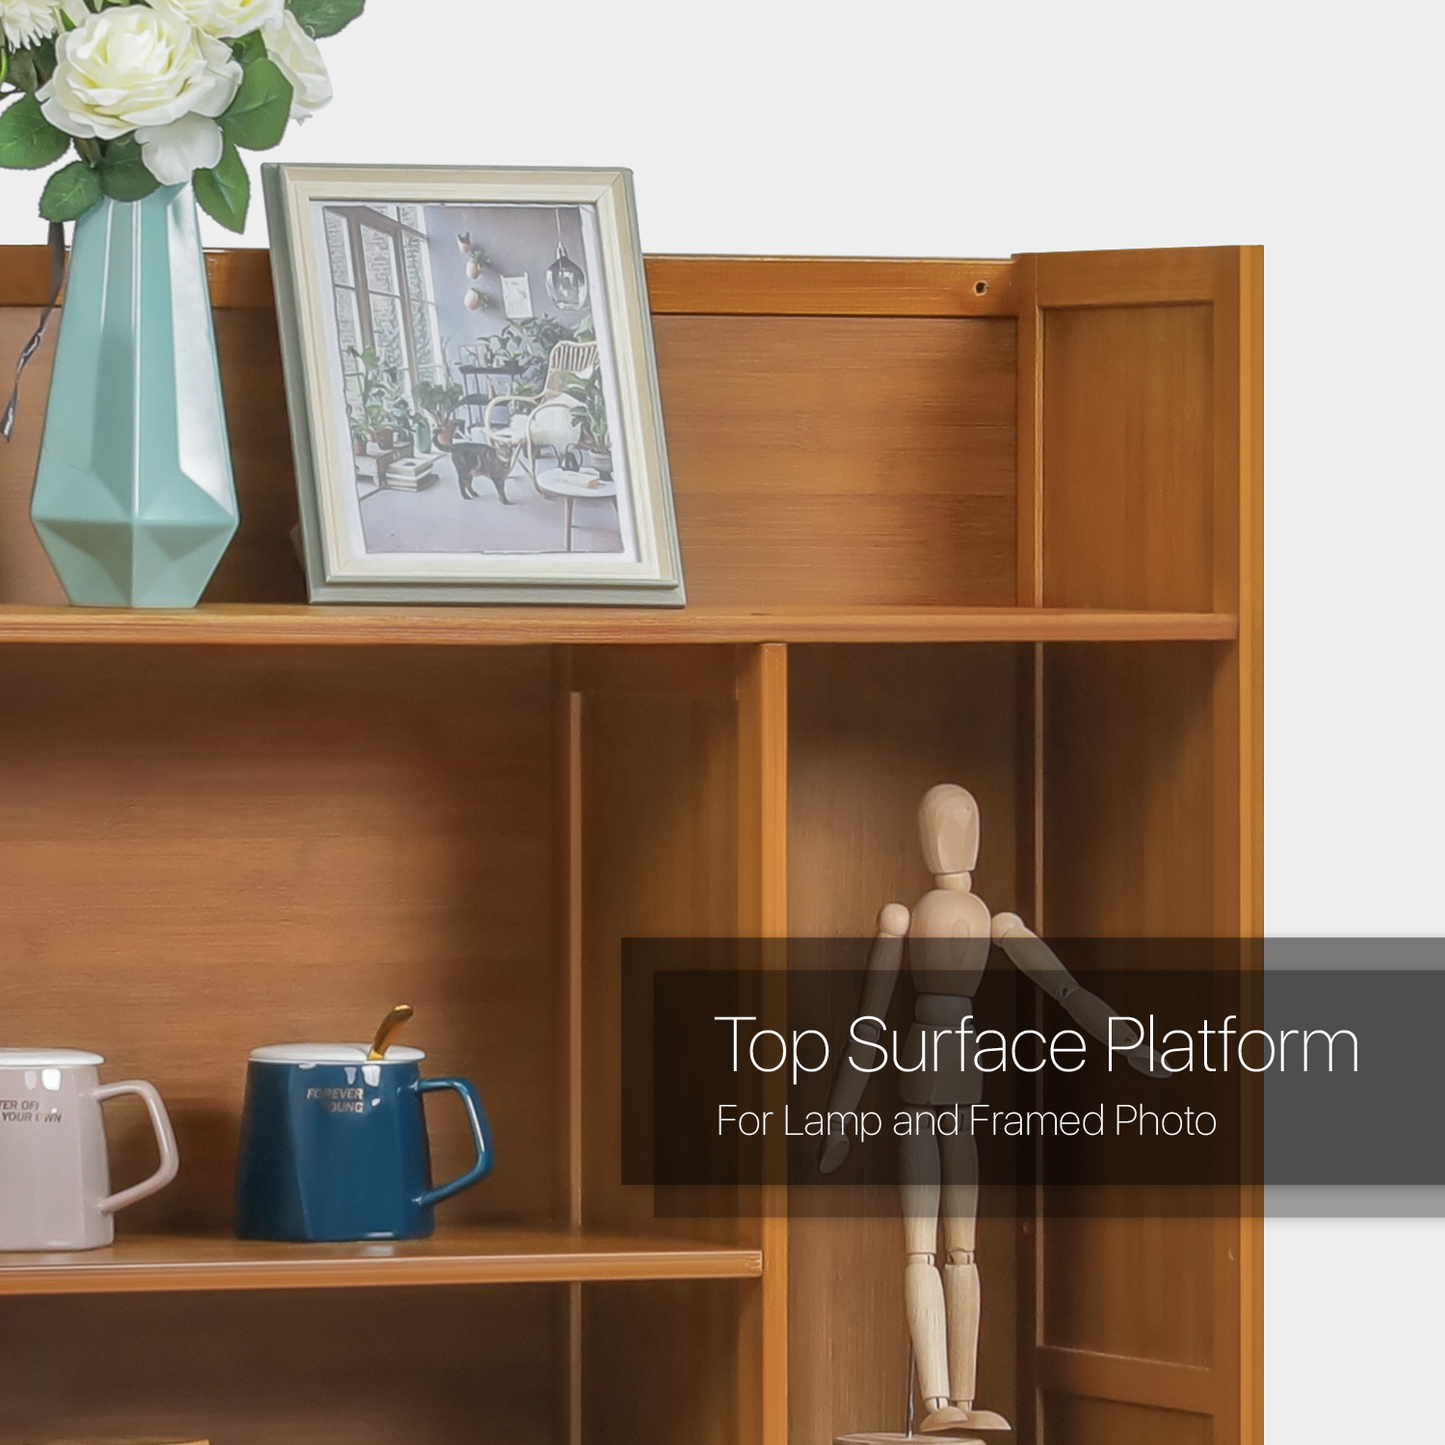 Multi-Functional Storage Organizer Shelf - Open Top - with Compartment Panel - 4 Tier - Brown